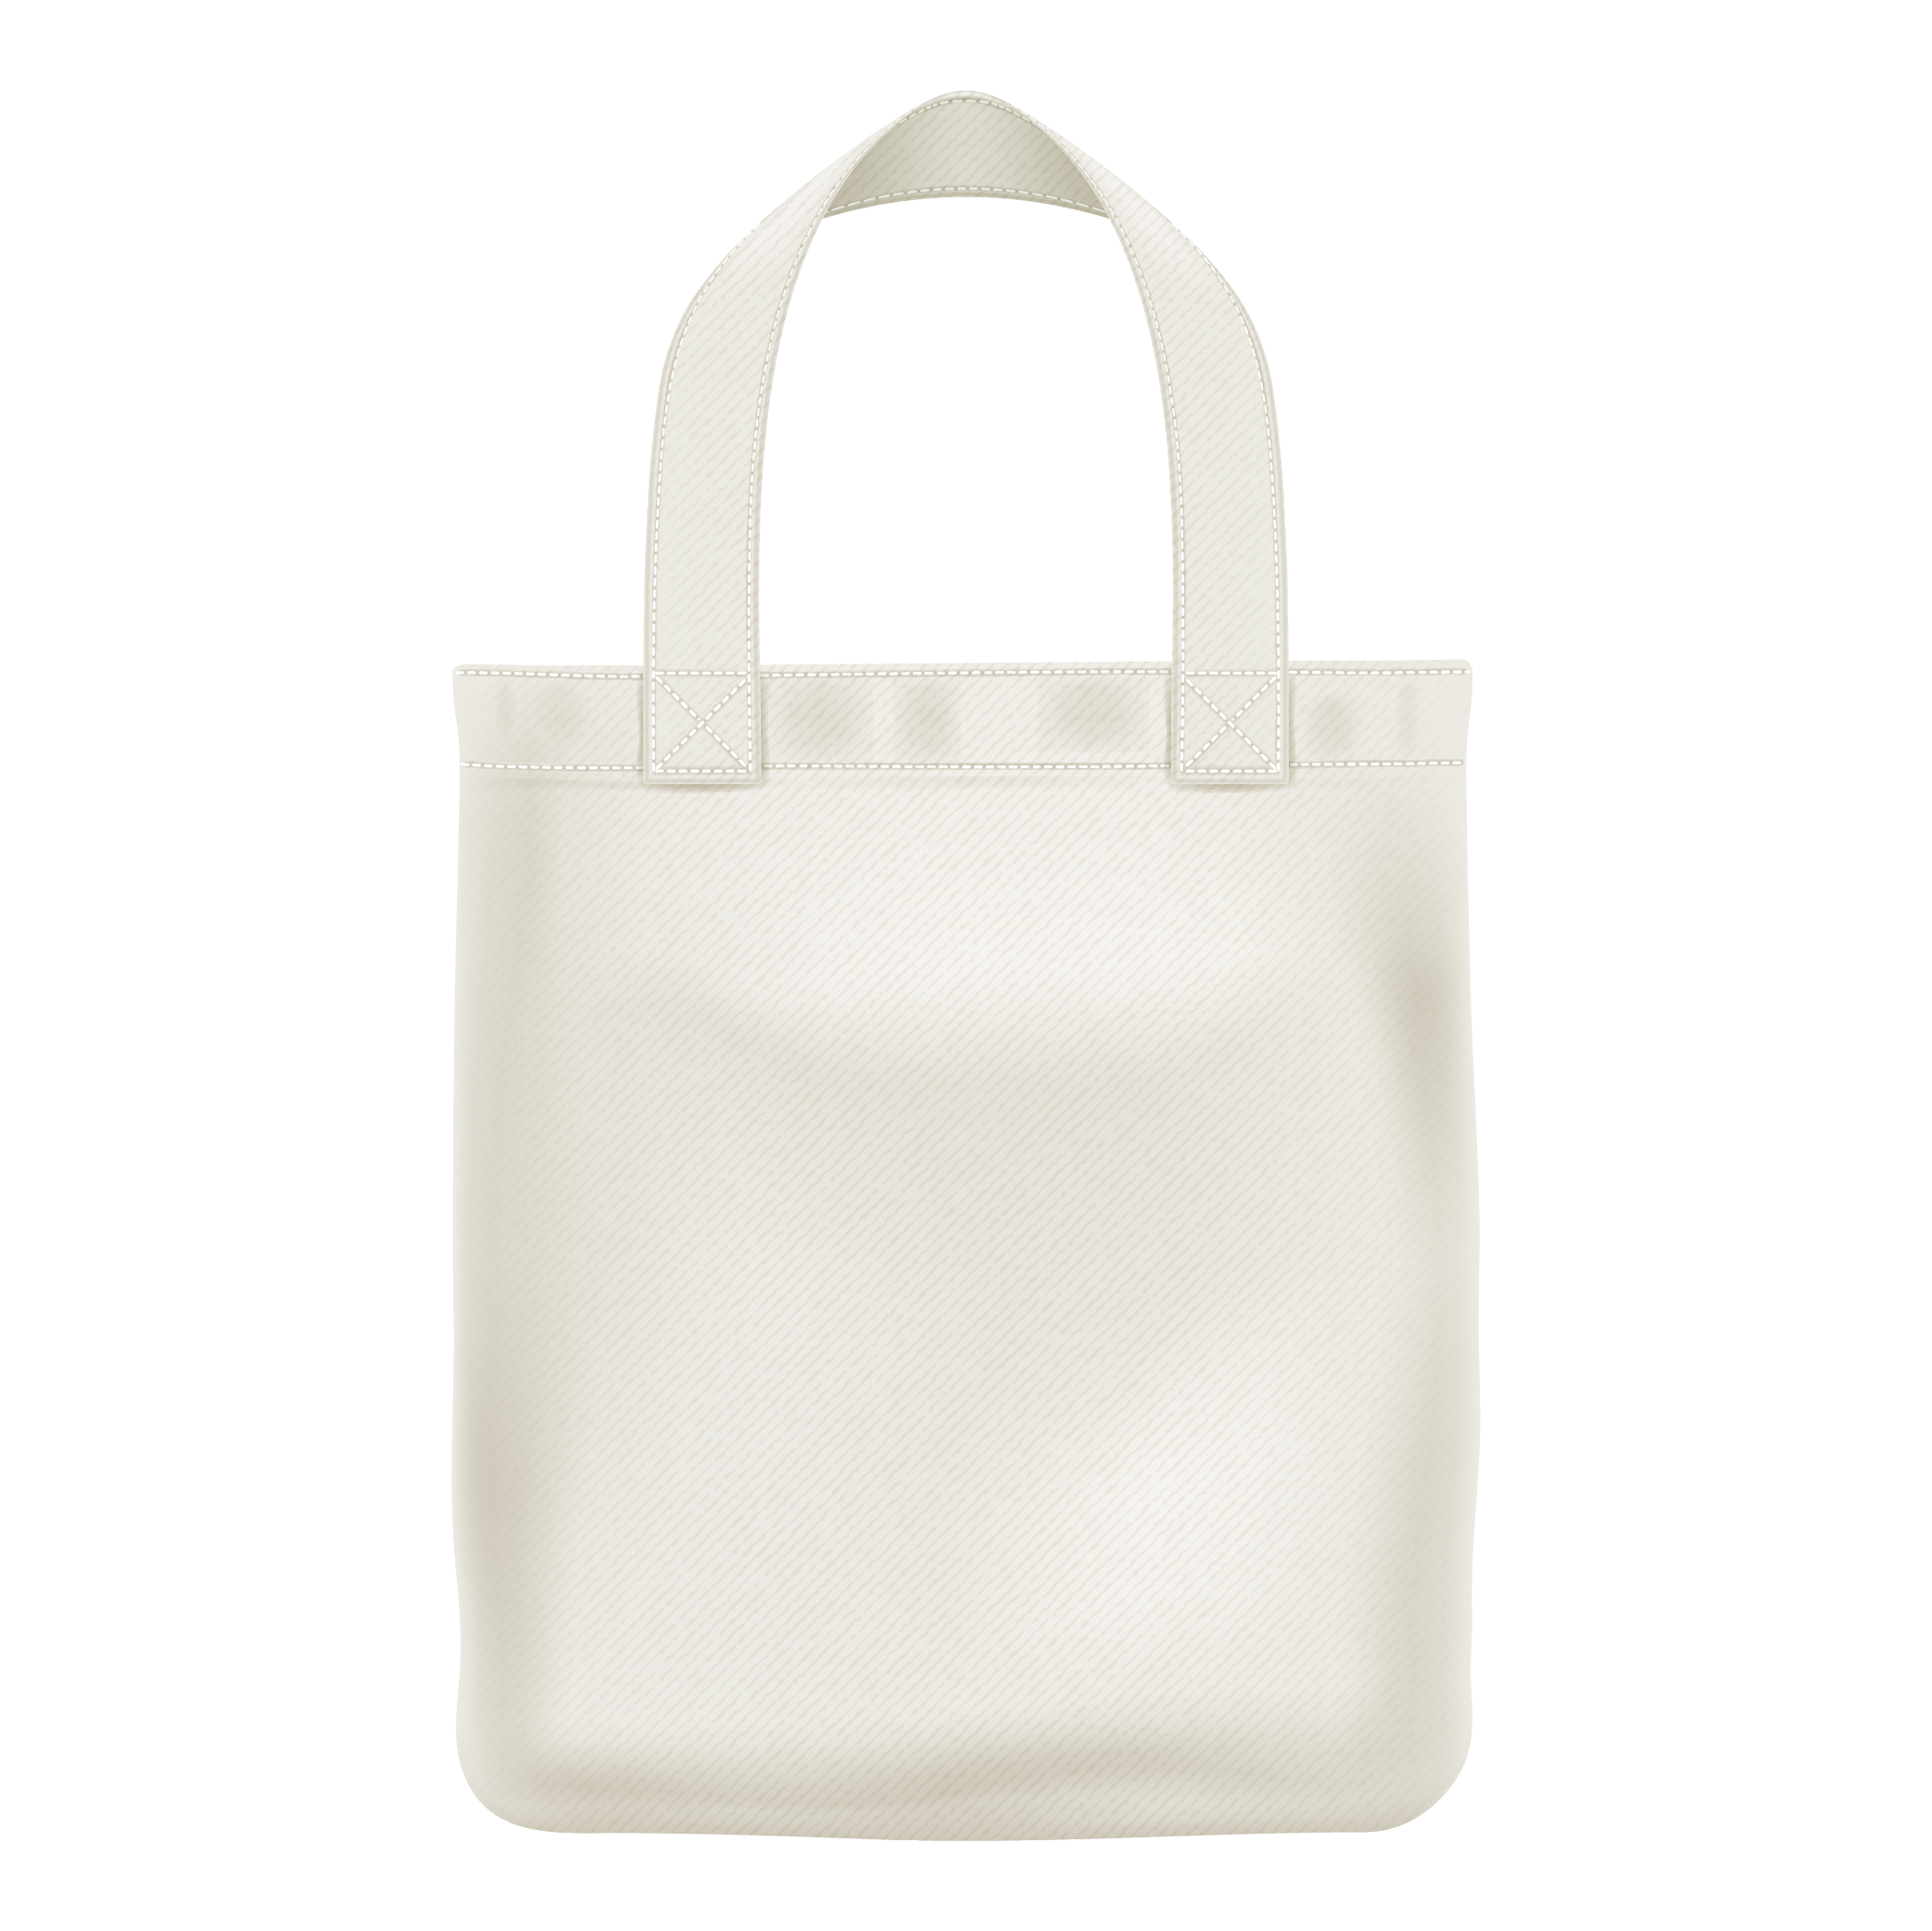 An icon of a reusable bag, which is allowed and encouraged by Washington's plastic bag ban.